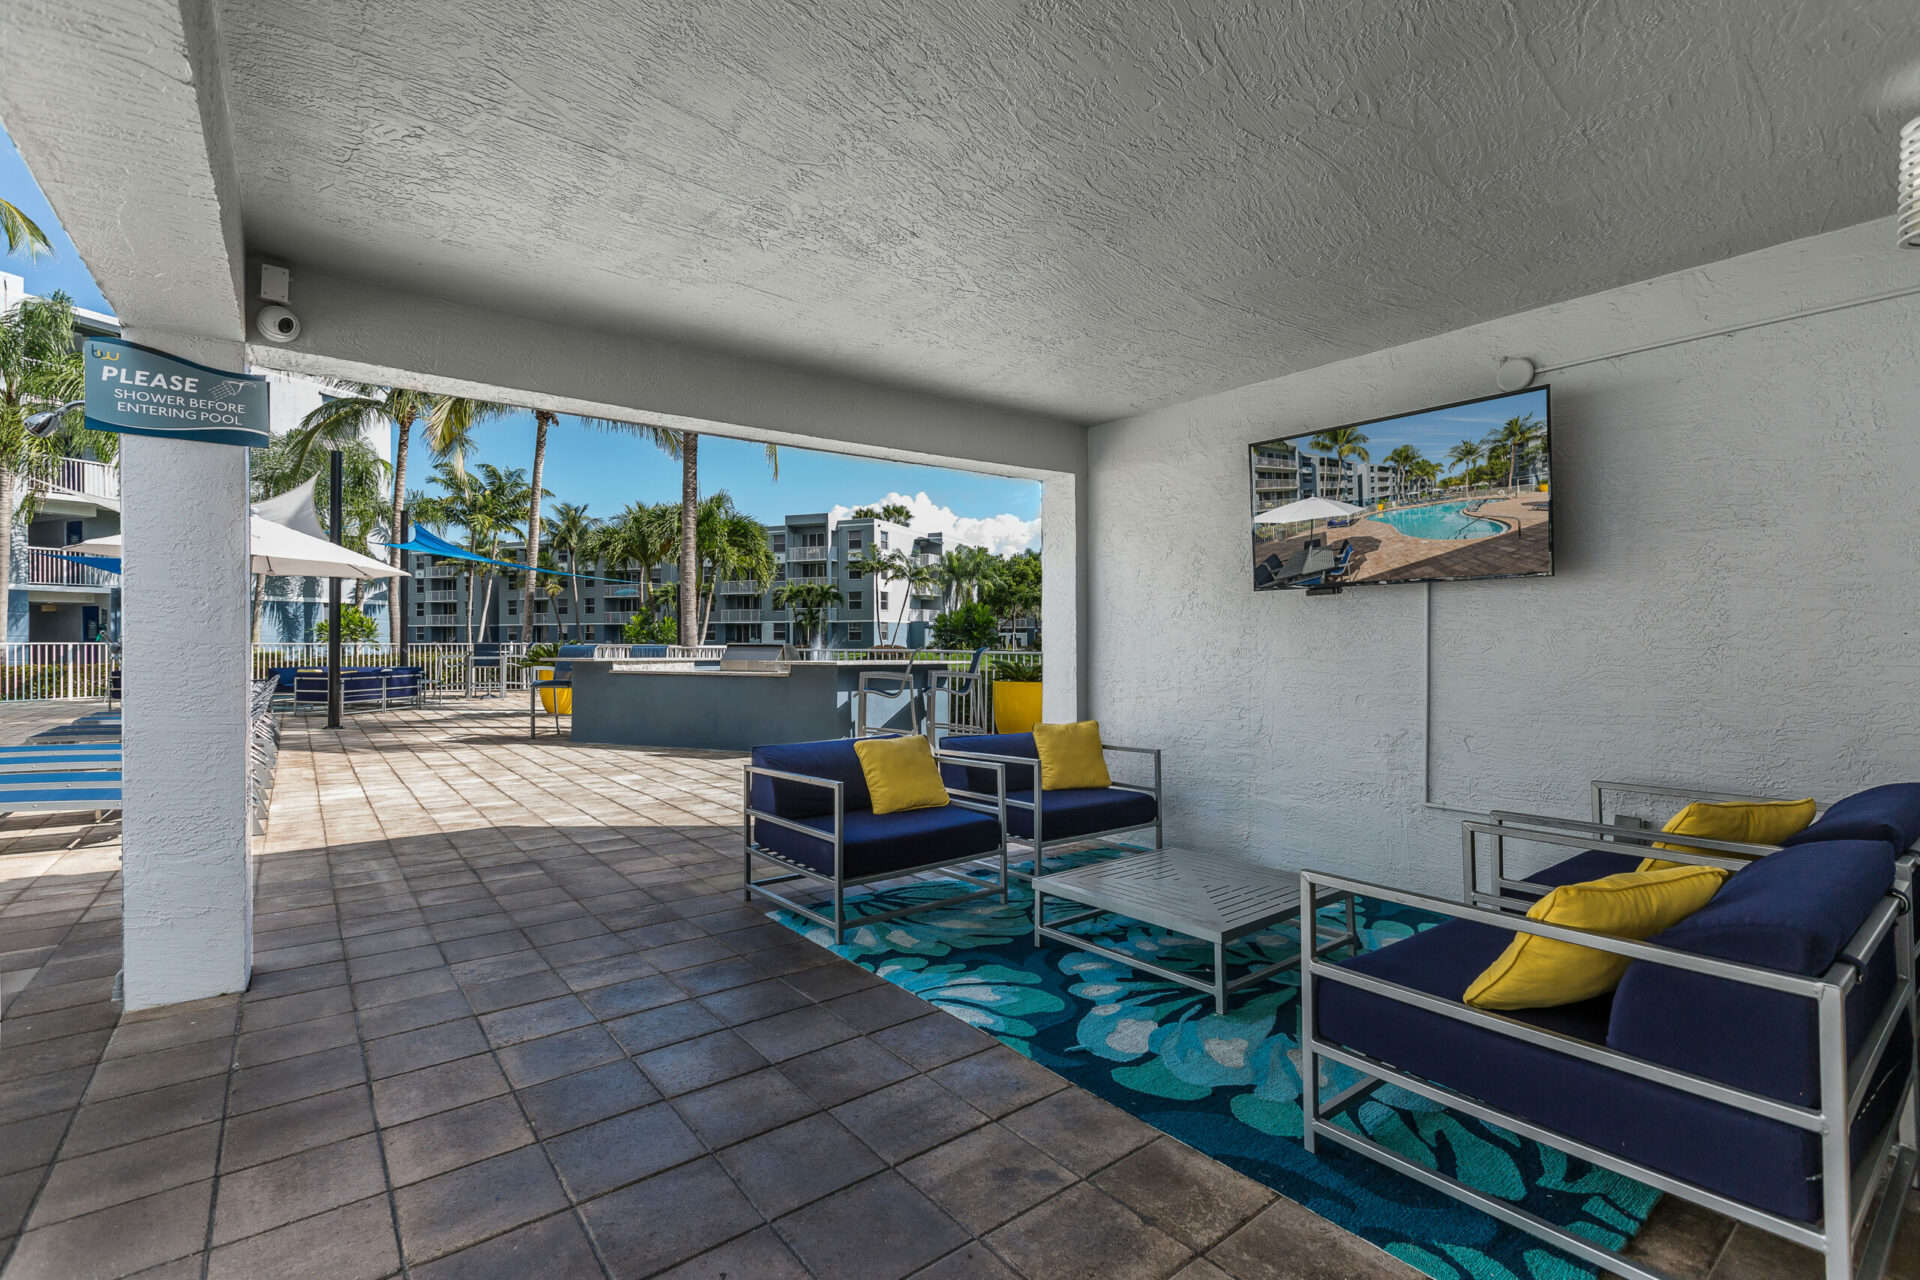 Outdoor pool area with a variety of seating options and an outdoor TV.